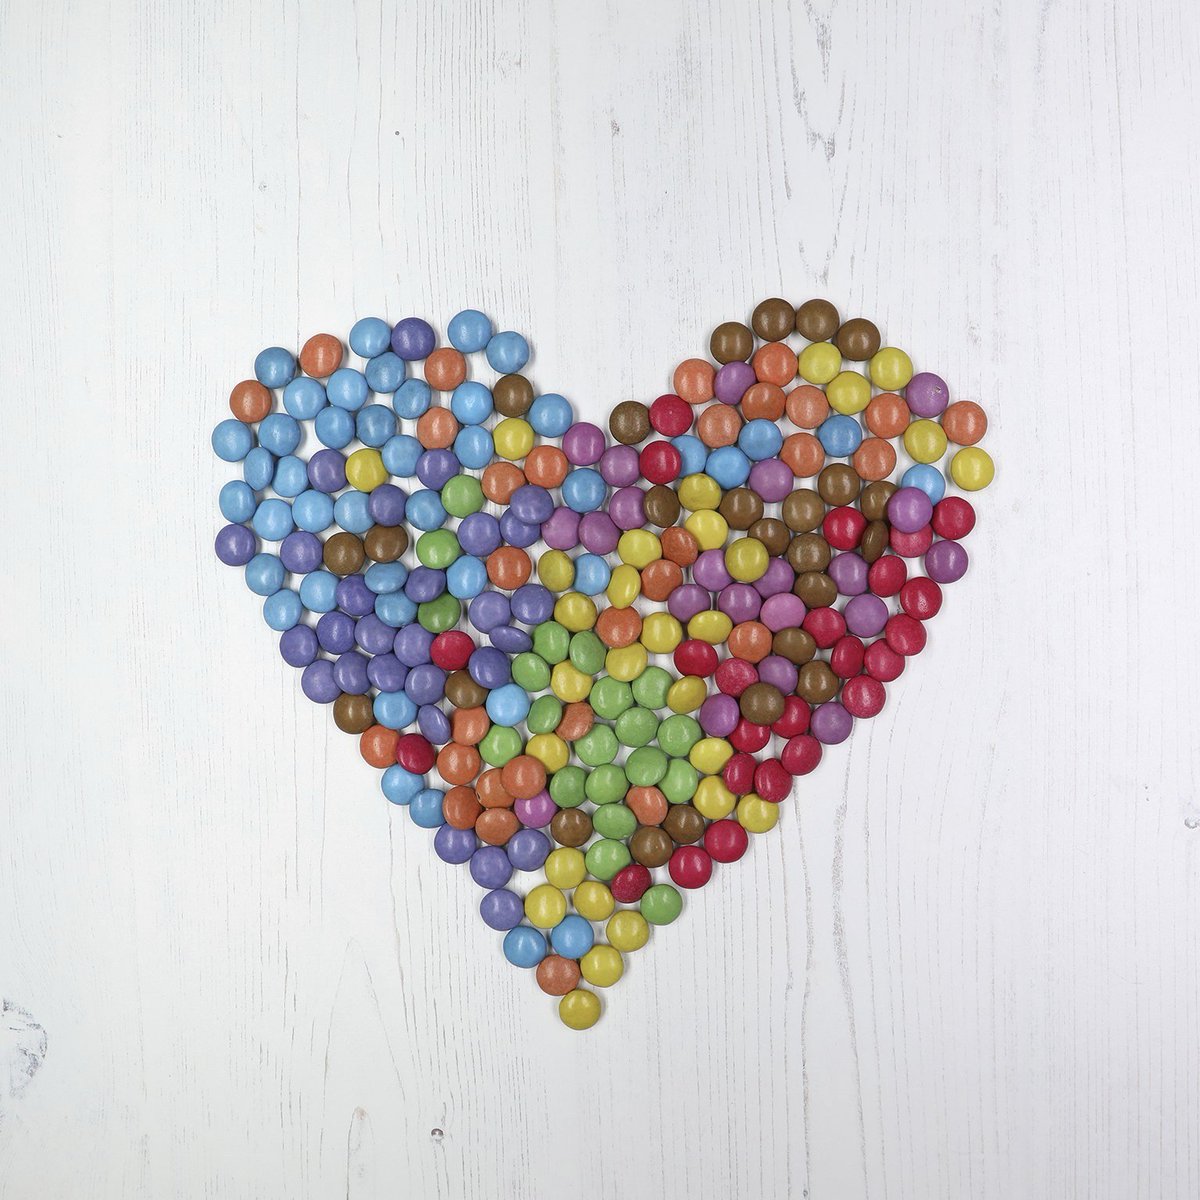 We just had to share some Smarties love this #SisterDay 💙 What art can you make using Smarties? #UnboxImagination